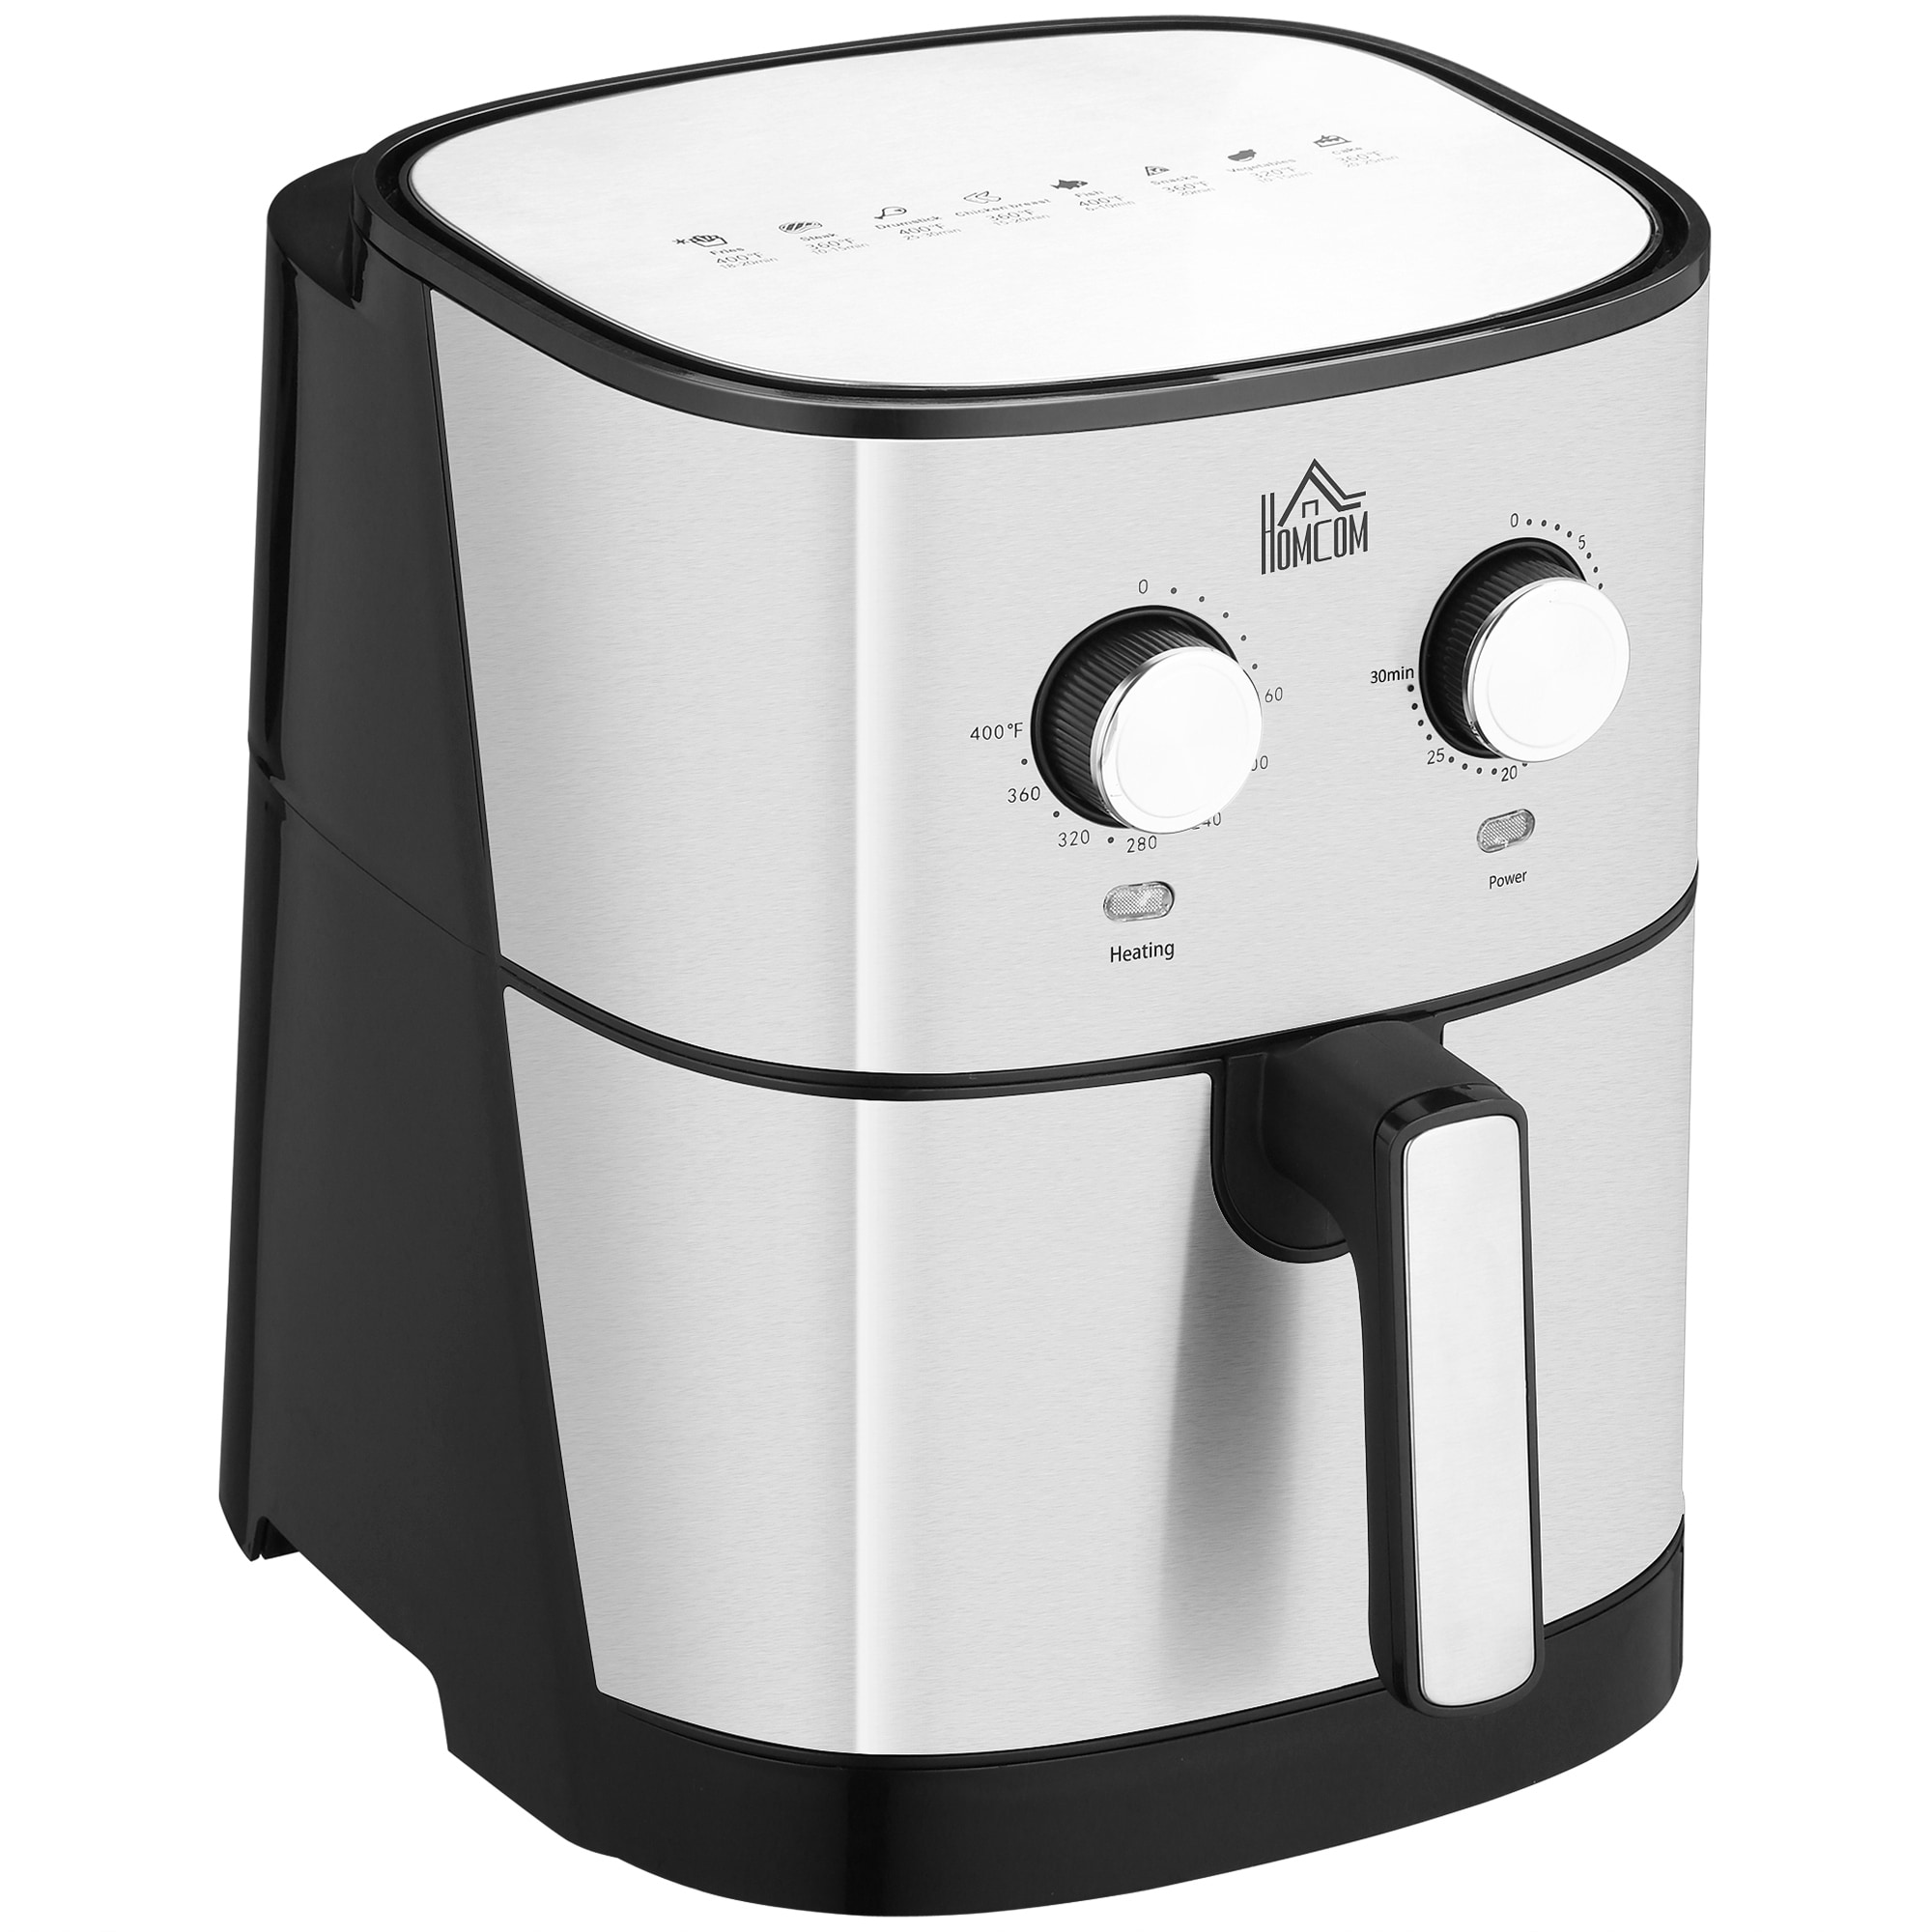 https://ak1.ostkcdn.com/images/products/is/images/direct/dcc3abaea9e64a655f0908fe511459f1eaa69193/HOMCOM-Air-Fryer%2C-1700W-6.9-Quart-Air-Fryers-Oven-with-360%C2%B0-Air-Circulation%2C-Adjustable-Temperature%2C-Timer-and-Nonstick-Basket.jpg